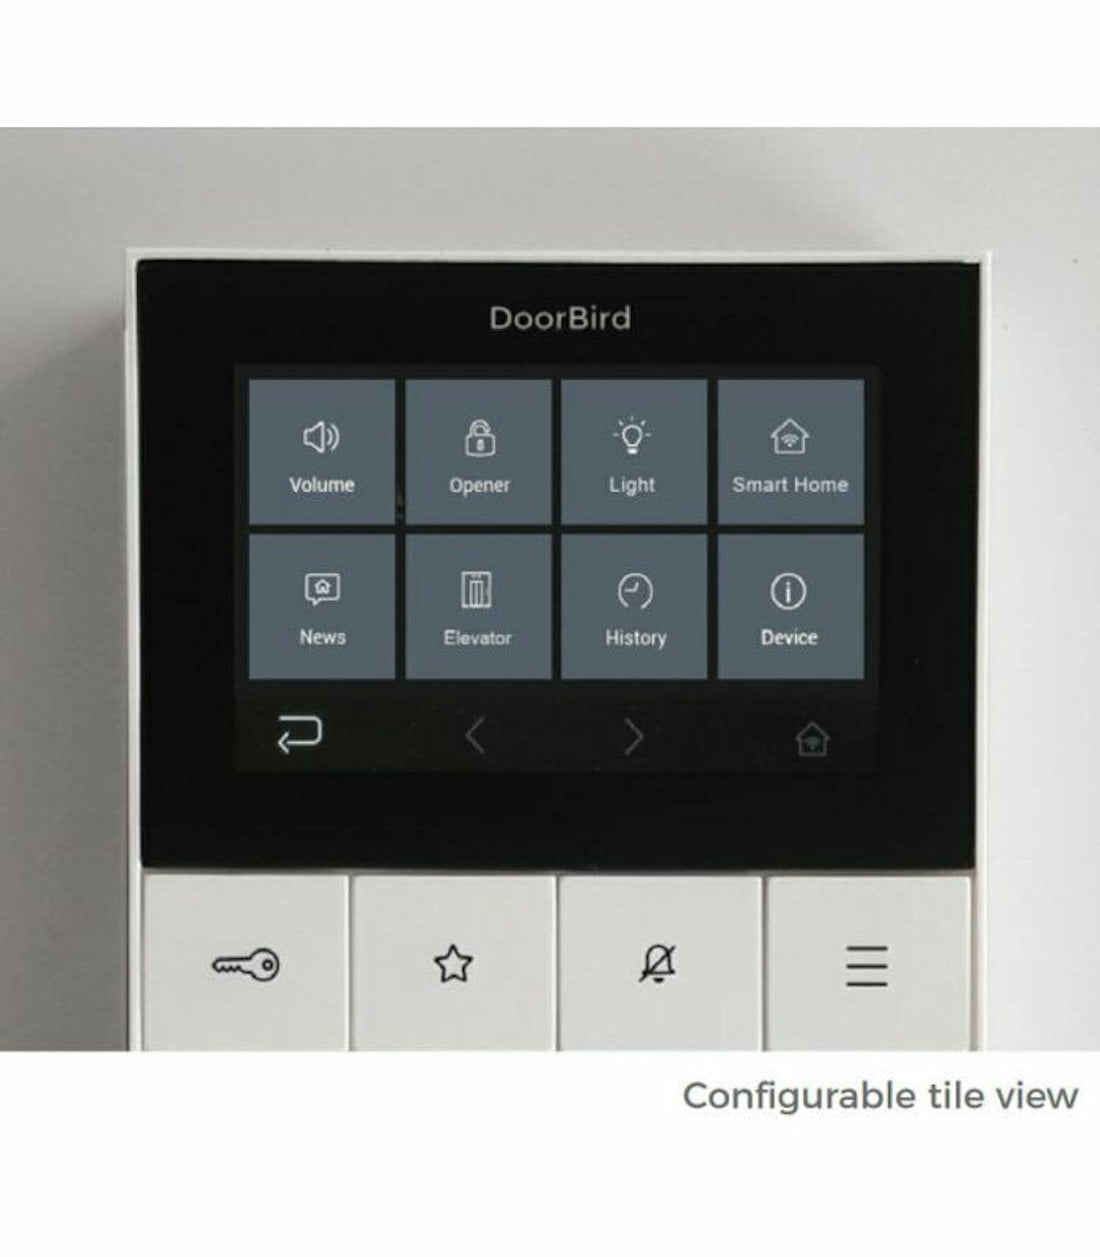 DoorBird A1101 IP Video Indoor Station for Door Communication in Single Family Residences and Apartment Buildings Configuration View